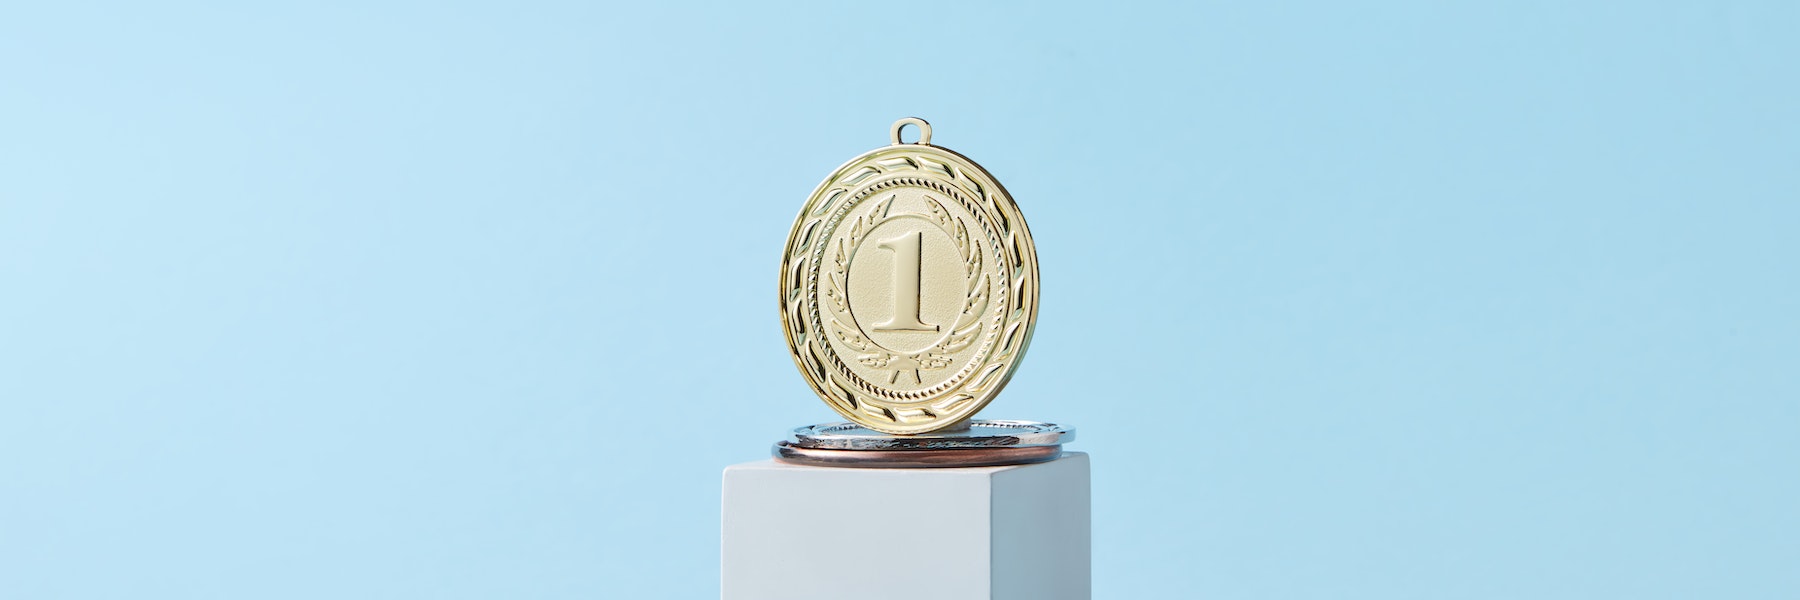 Award medallion that has the number 1 on it